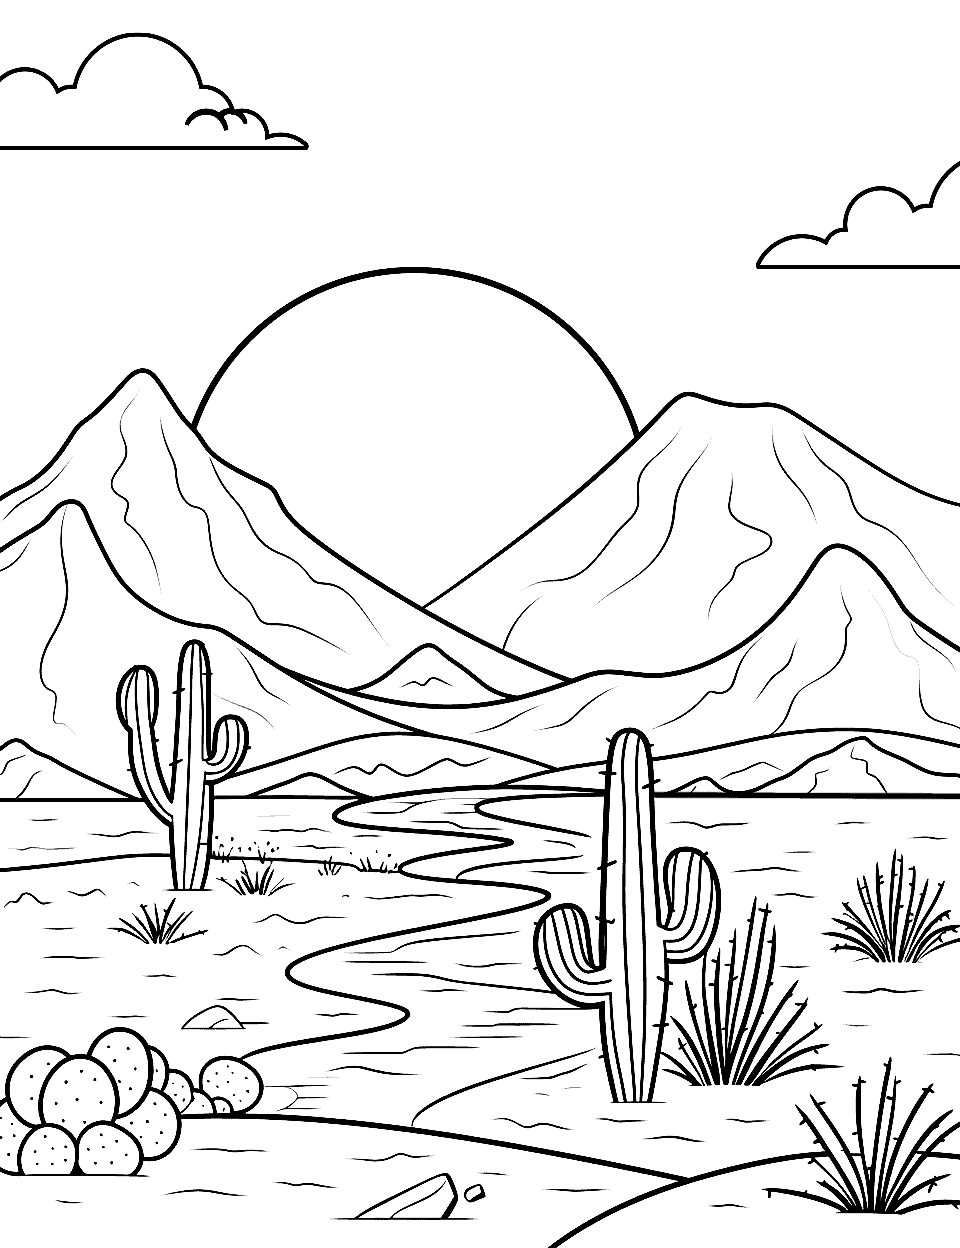 Desert Landscape at Sunset Coloring Page - A desert scene with cacti and mountains, under a sunset sky.